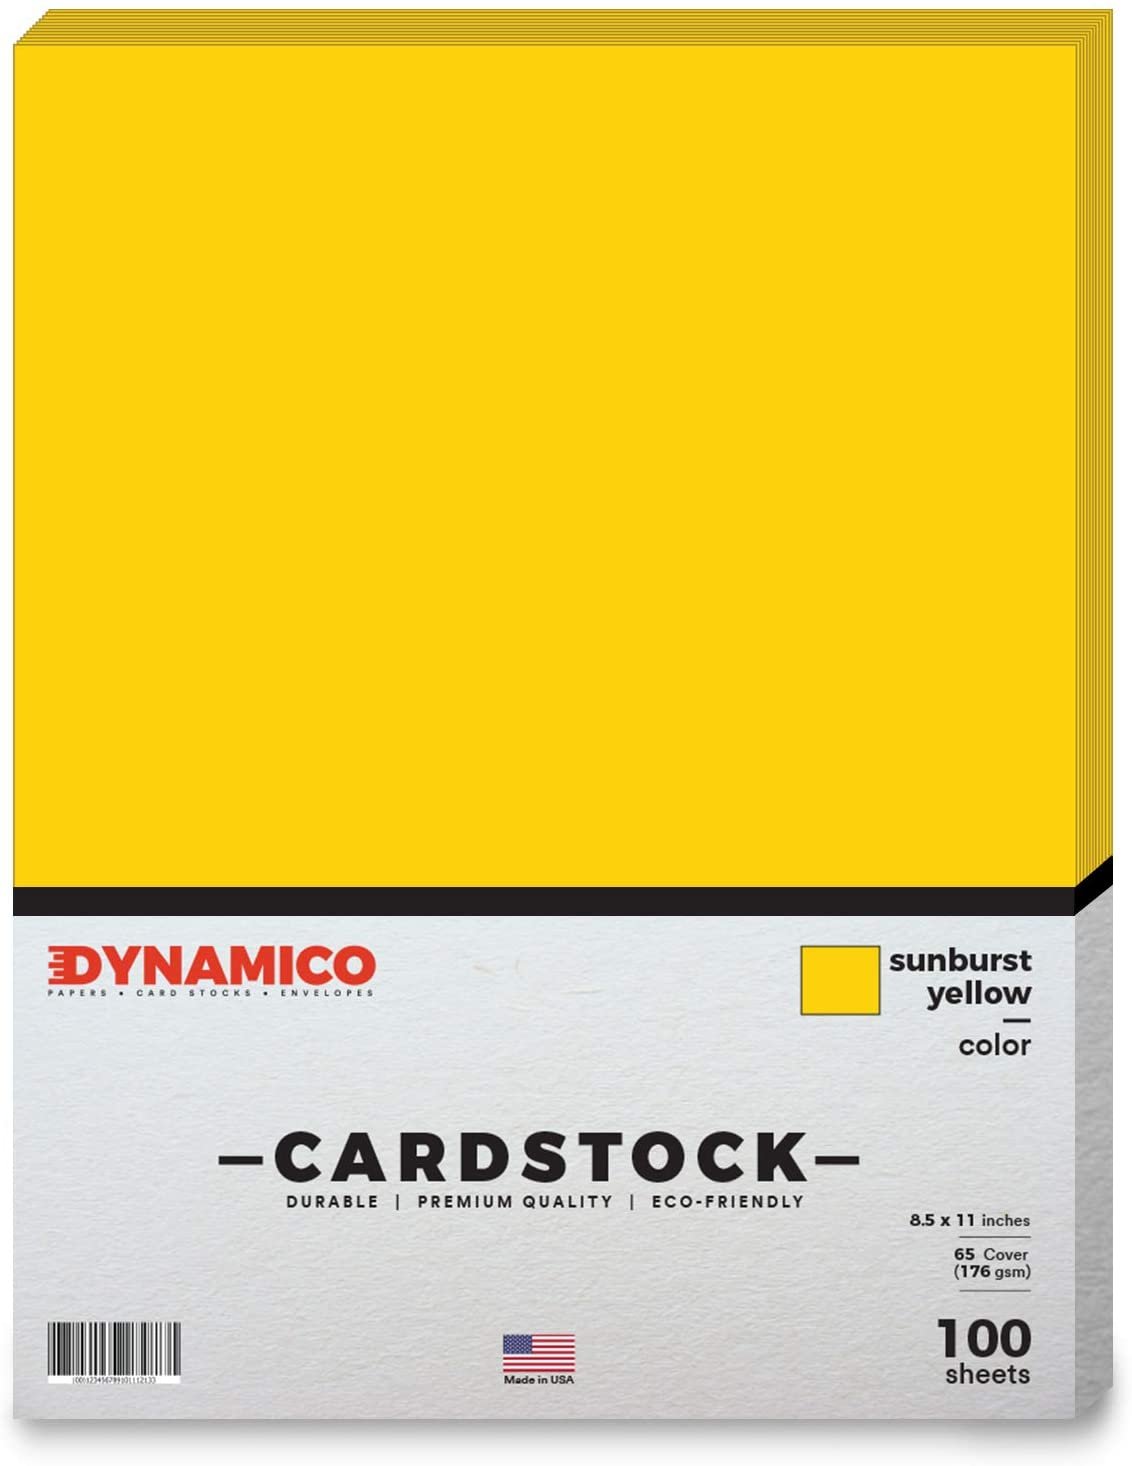 Sunburst Yellow Cardstock Paper – 8 1/2 x 11 Medium Weight 65 lb (175 Gsm) Cover Card Stock - for Cards, Invitations, Brochure, Award, and Stationery